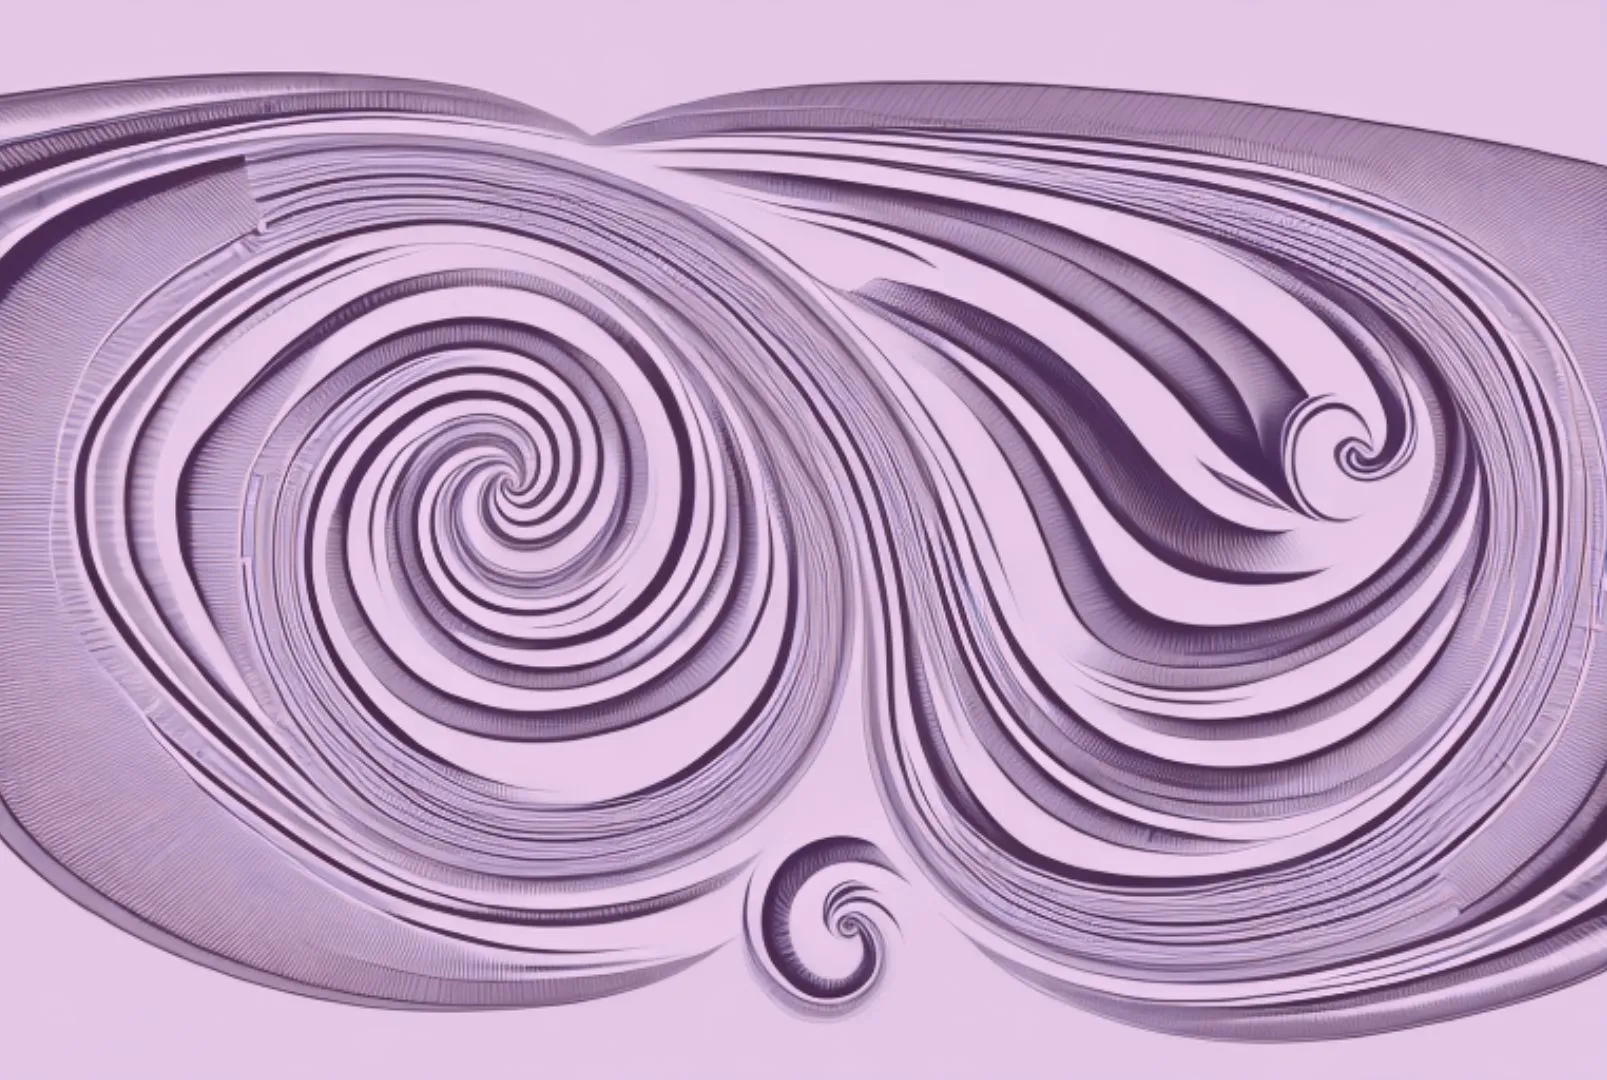 Black swirls. Hero image for article on outcome-based roadmaps.